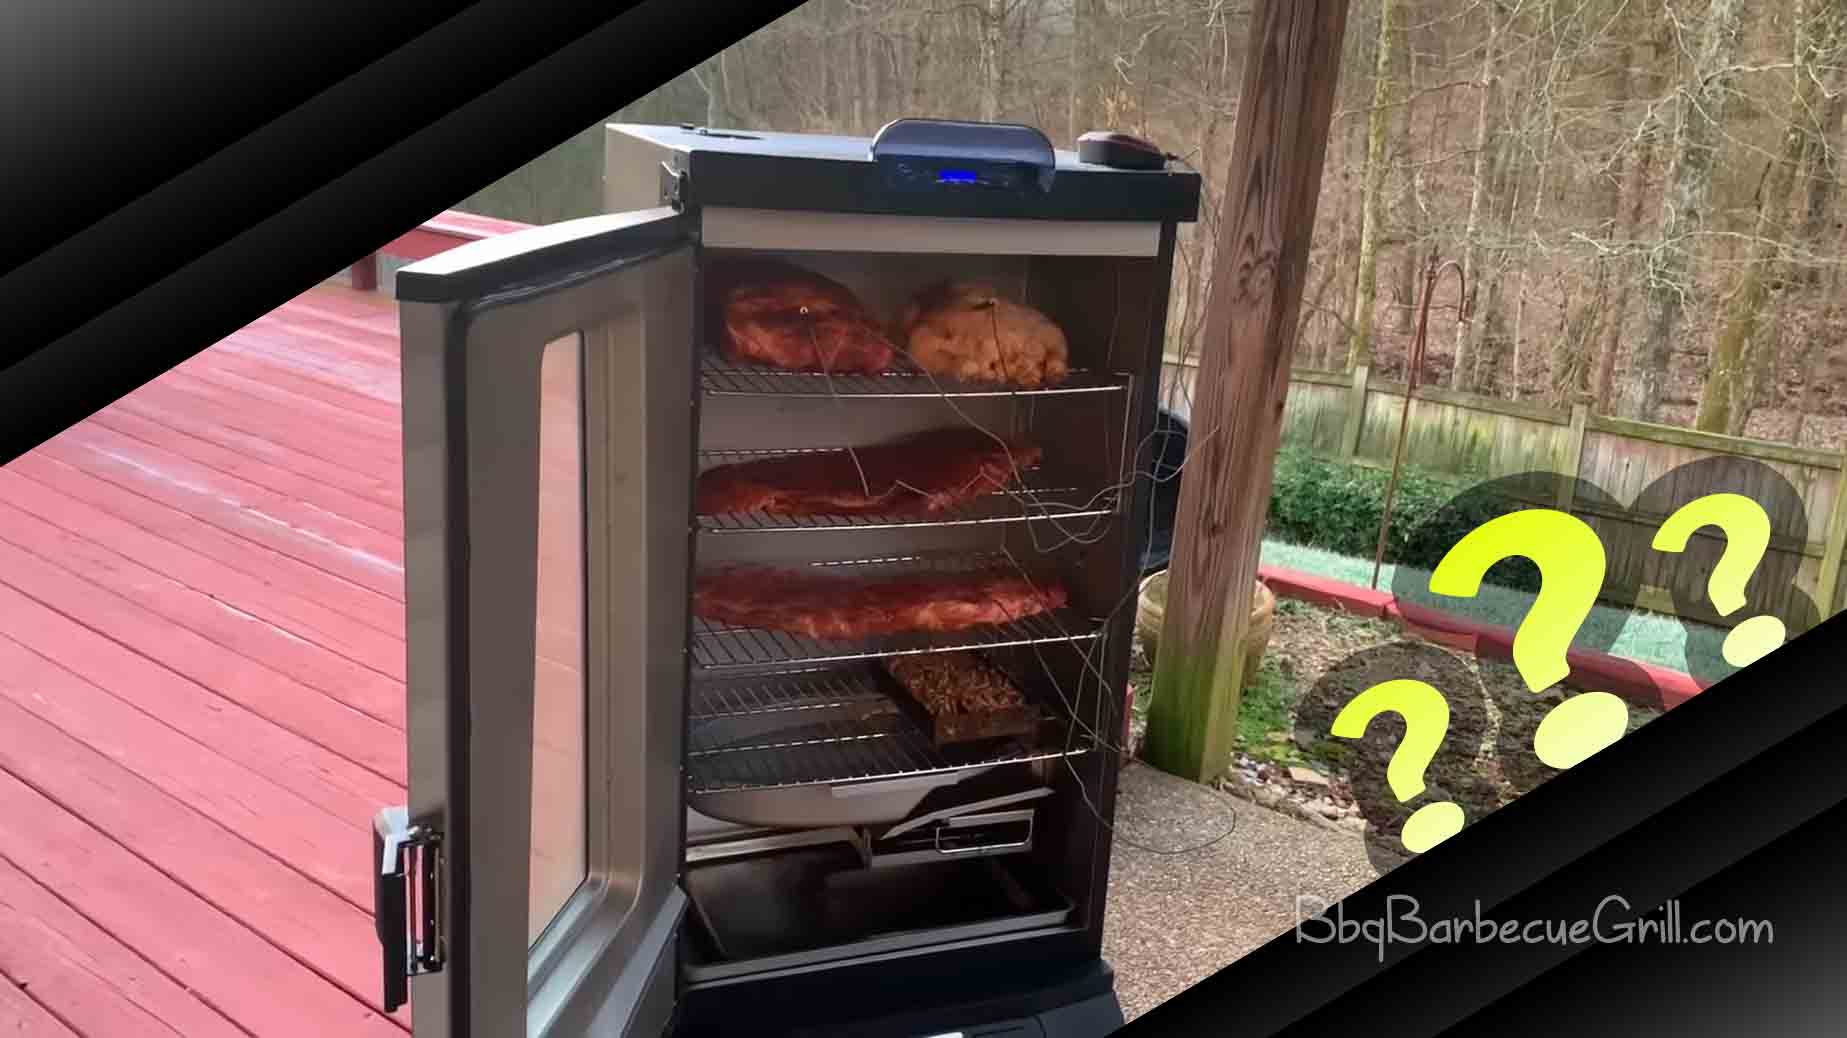 How To Smoke Meat With Electric Smoker Bbq Grill,10th Anniversary Ideas